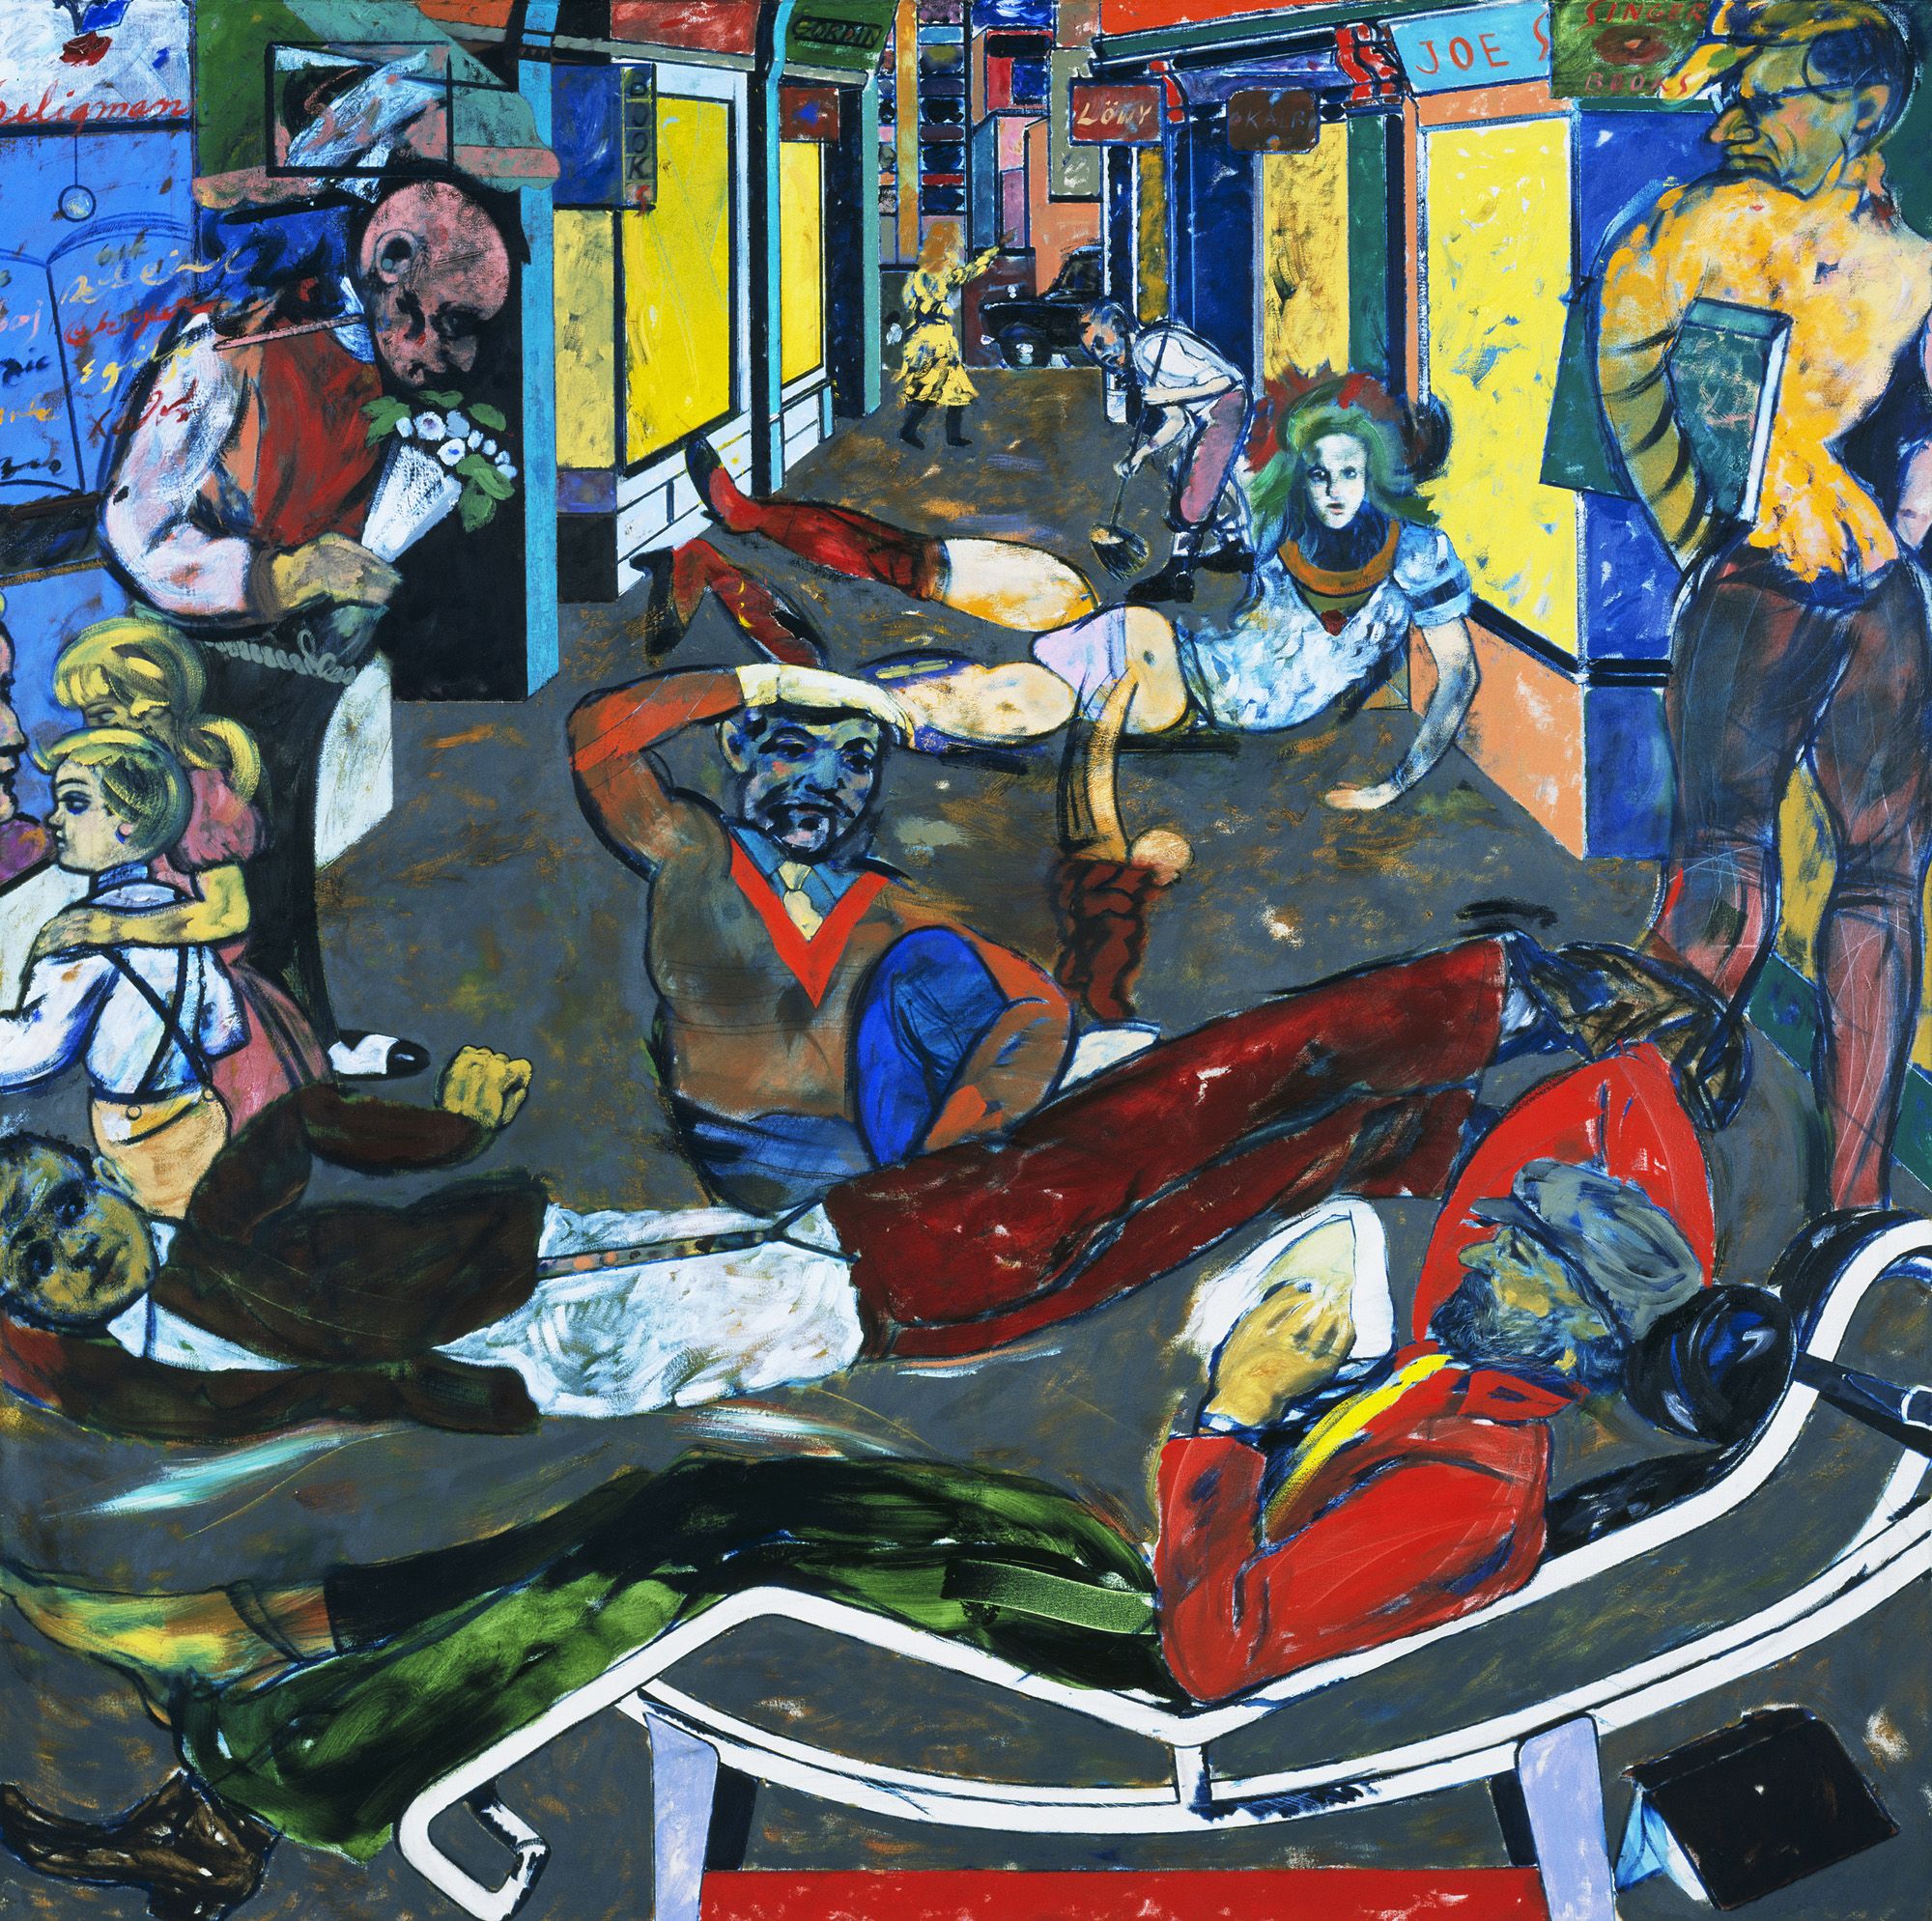 R. B. Kitaj  Cecil Court, London W. C. 2 (The Refugees), 1983–1984 Oil paint on canvas 183 × 183 Tate. Purchased 1985  Credit: © Tate, London 2018